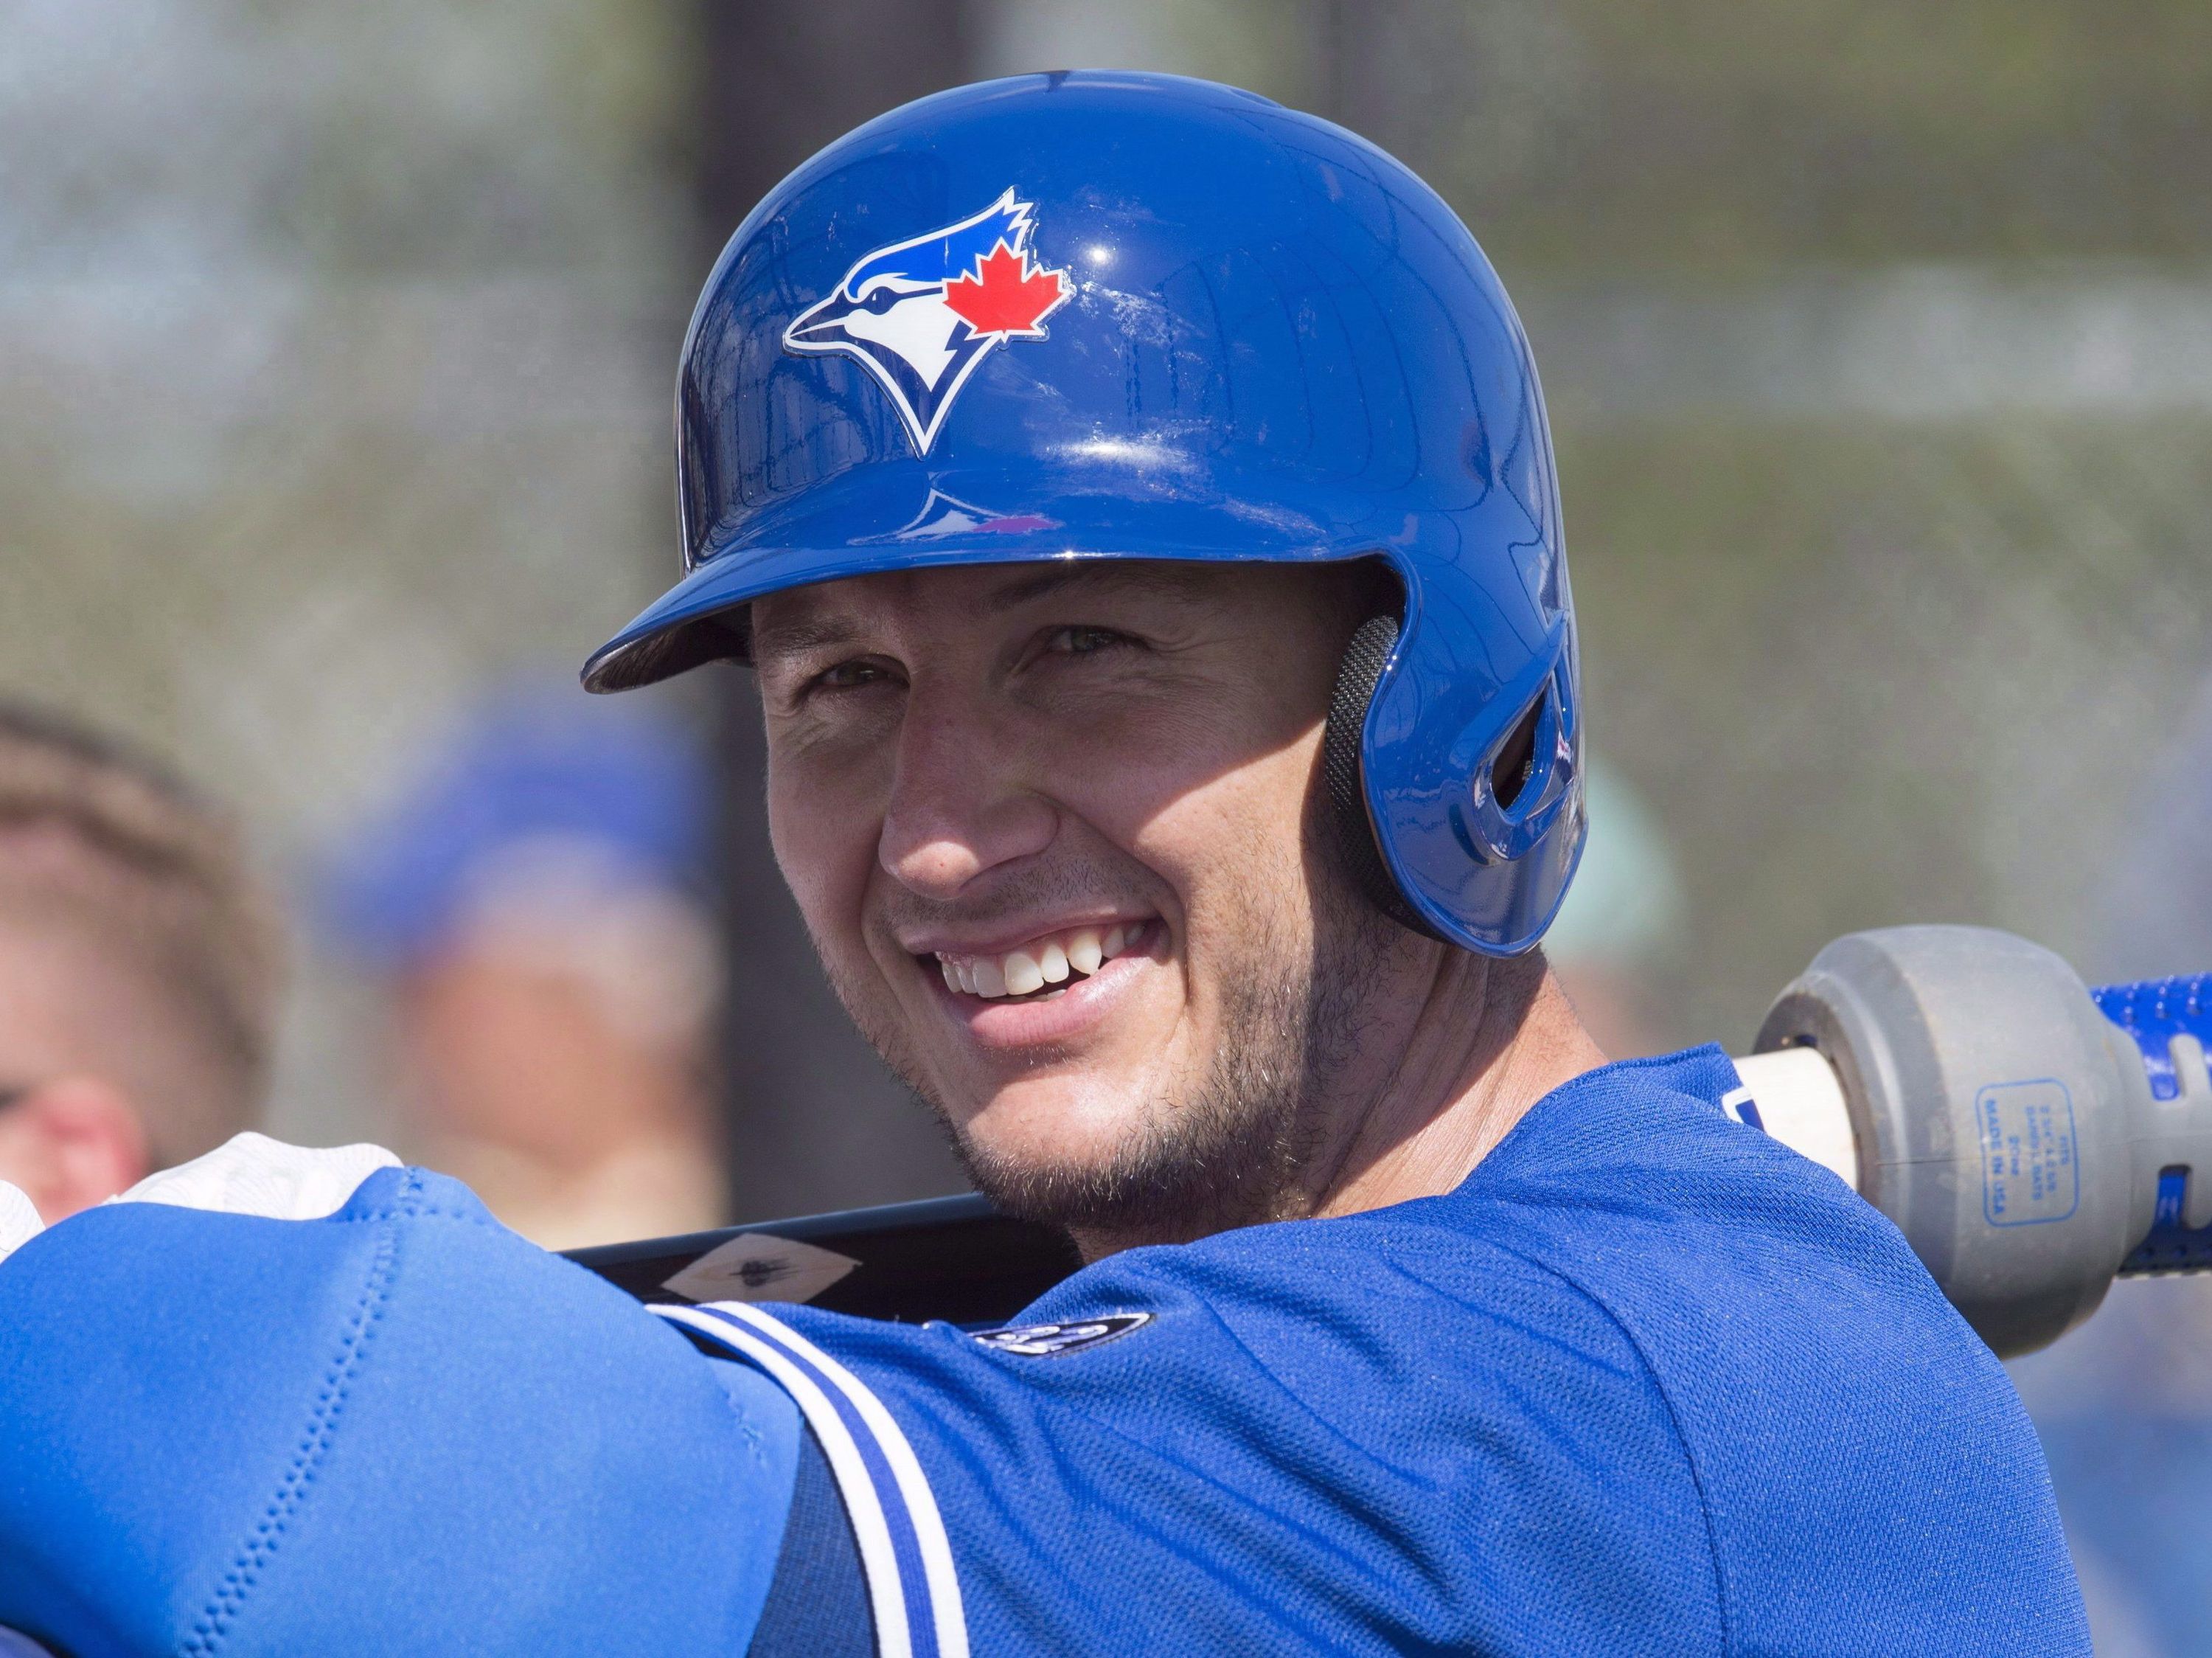 Troy Tulowitzki poses as a pitcher on Blue Jays' photo day